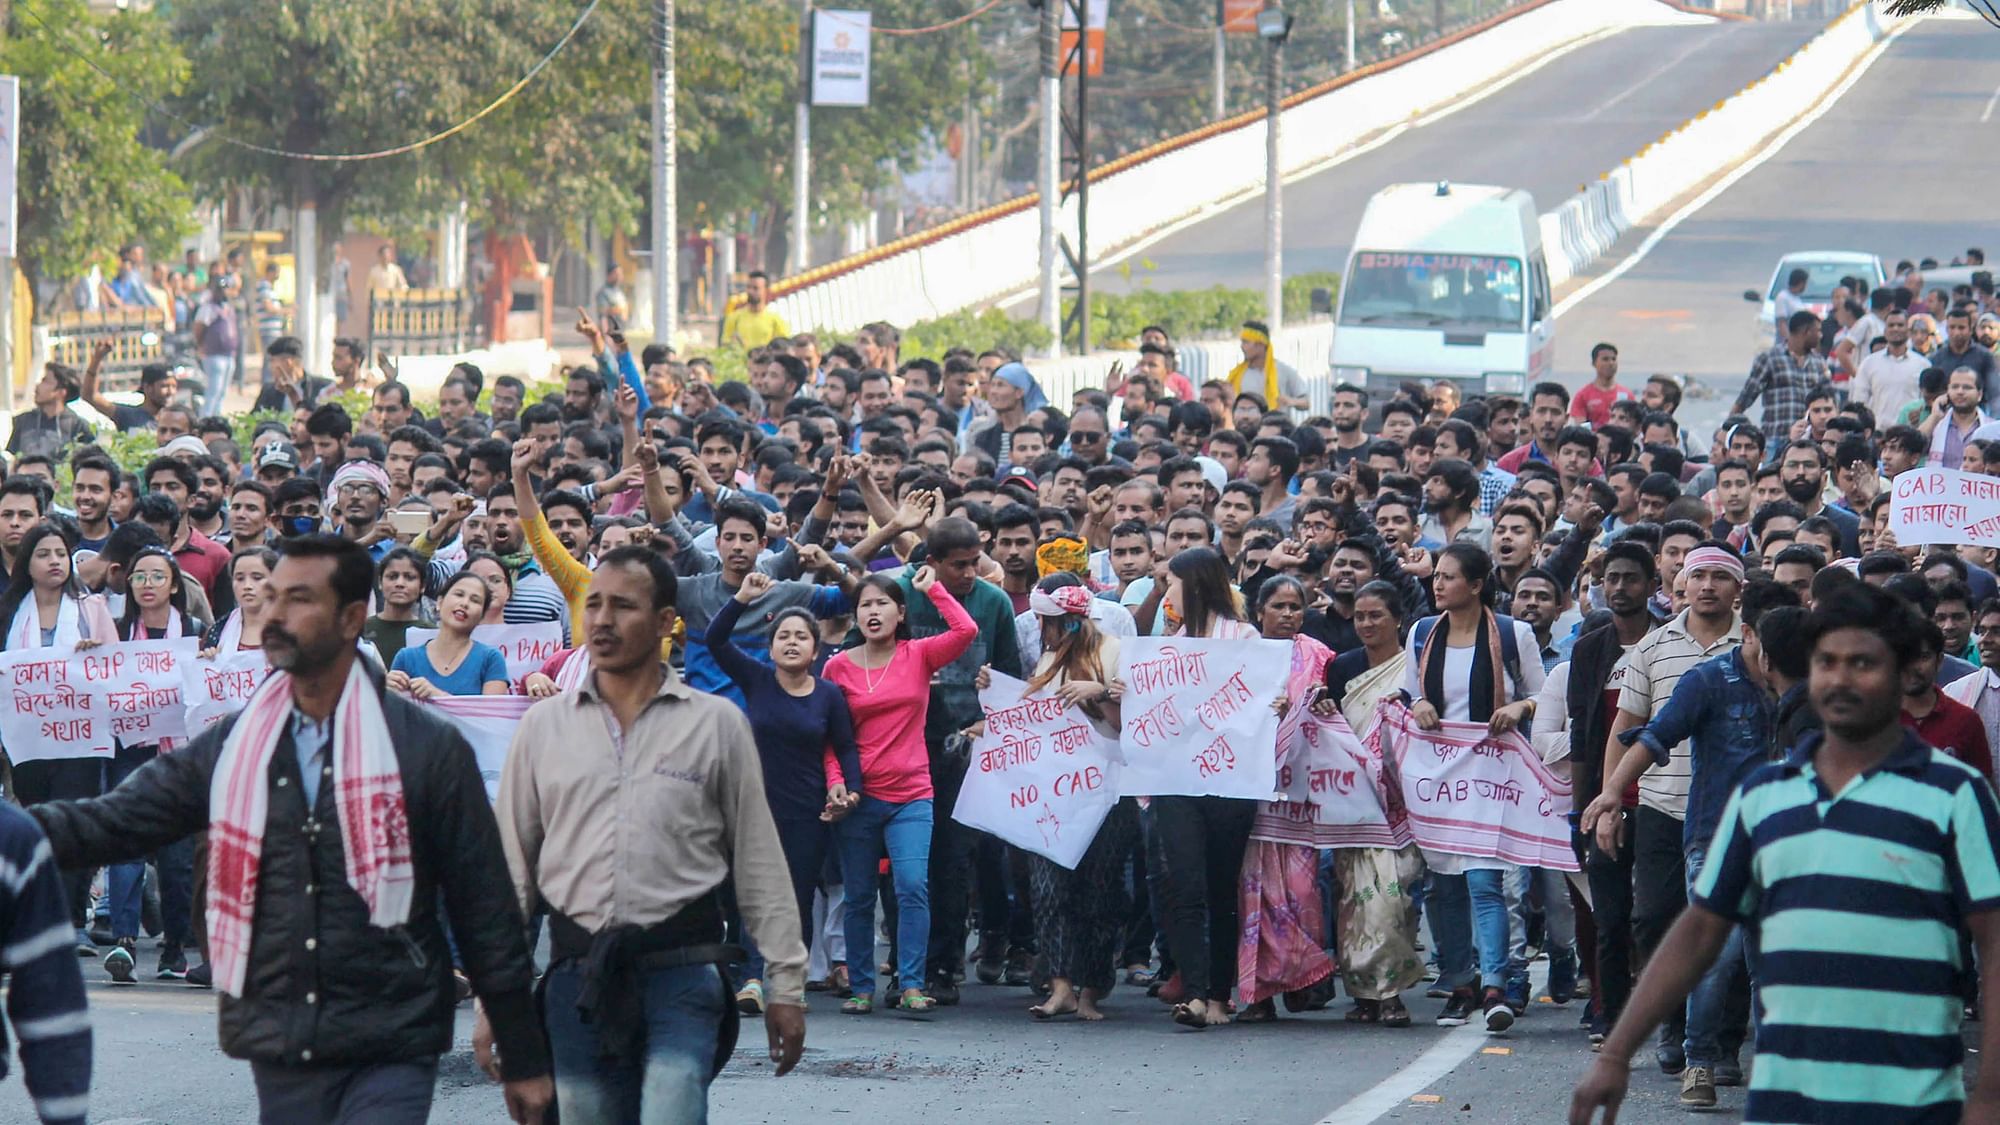 Protestors raise slogans as they take part in a demonstrationduring curfew, at GS Road in Guwahati on Thursday.